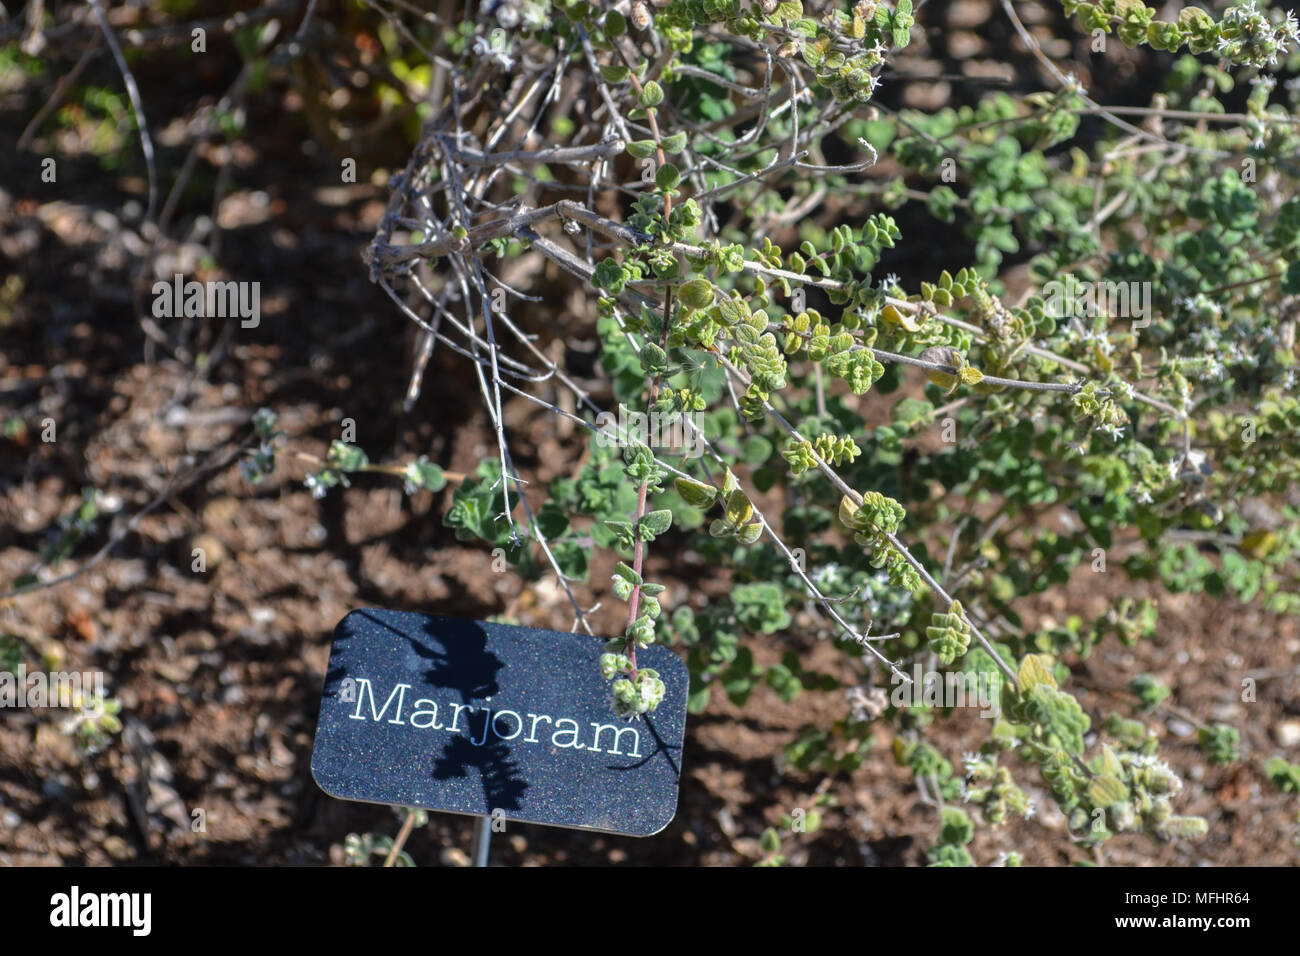 The gardens in San Clemente. Visit Casa Romanica and the herb garden. Horticulture is alive and delicious! Stock Photo